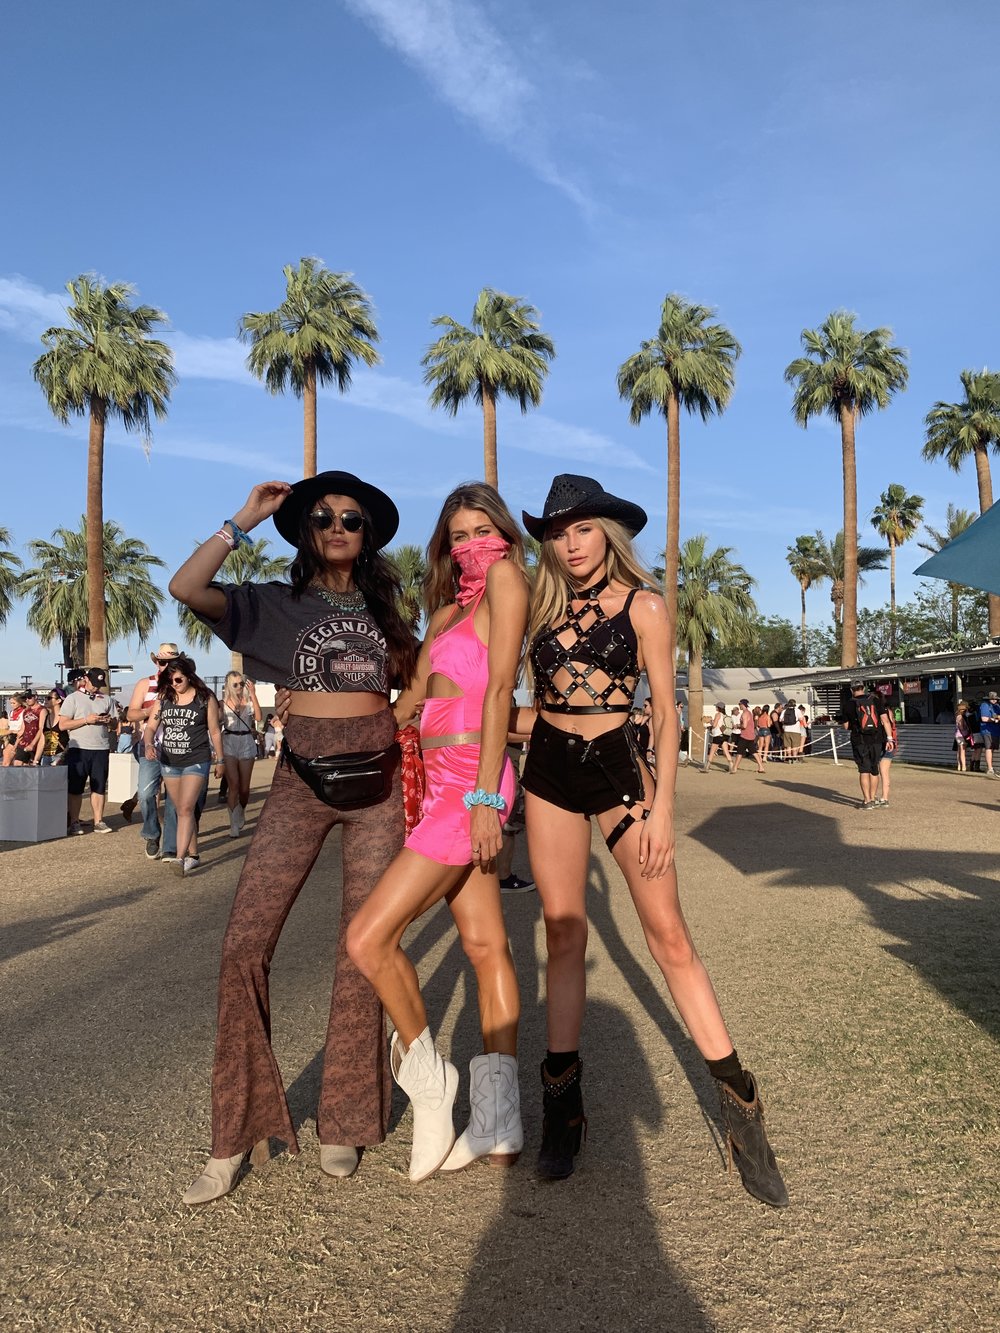 Best Outfit Ideas for Stagecoach - Cowgirl Fashion! — Liberty Netuschil